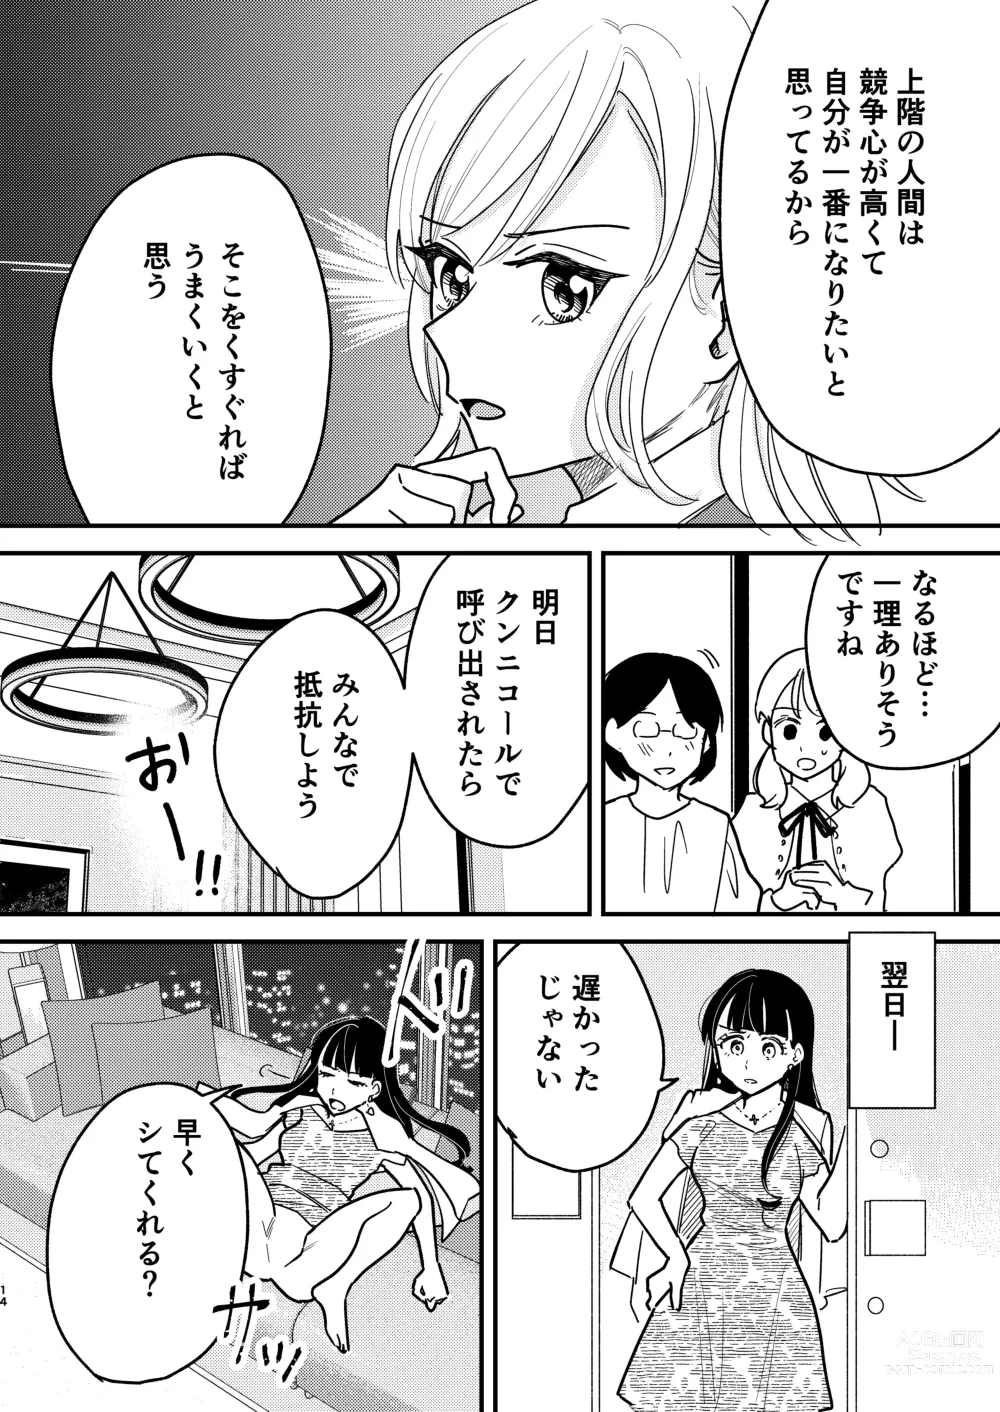 Page 14 of doujinshi Tower Mansion Cunni Caste